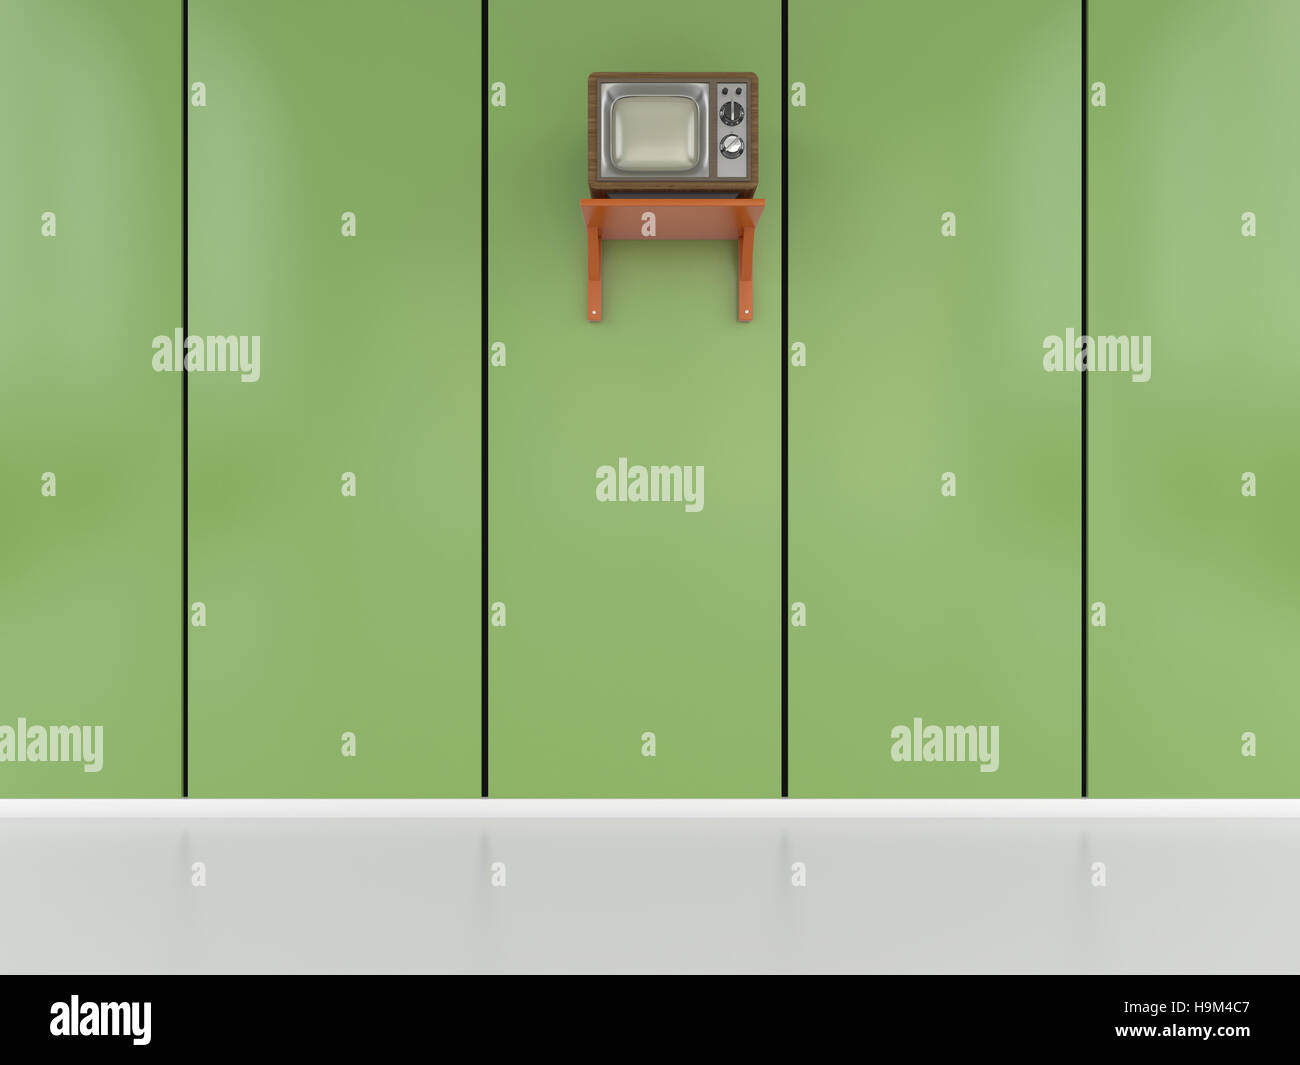 Vintage Tv hanging on wall, 3d rendering Stock Photo